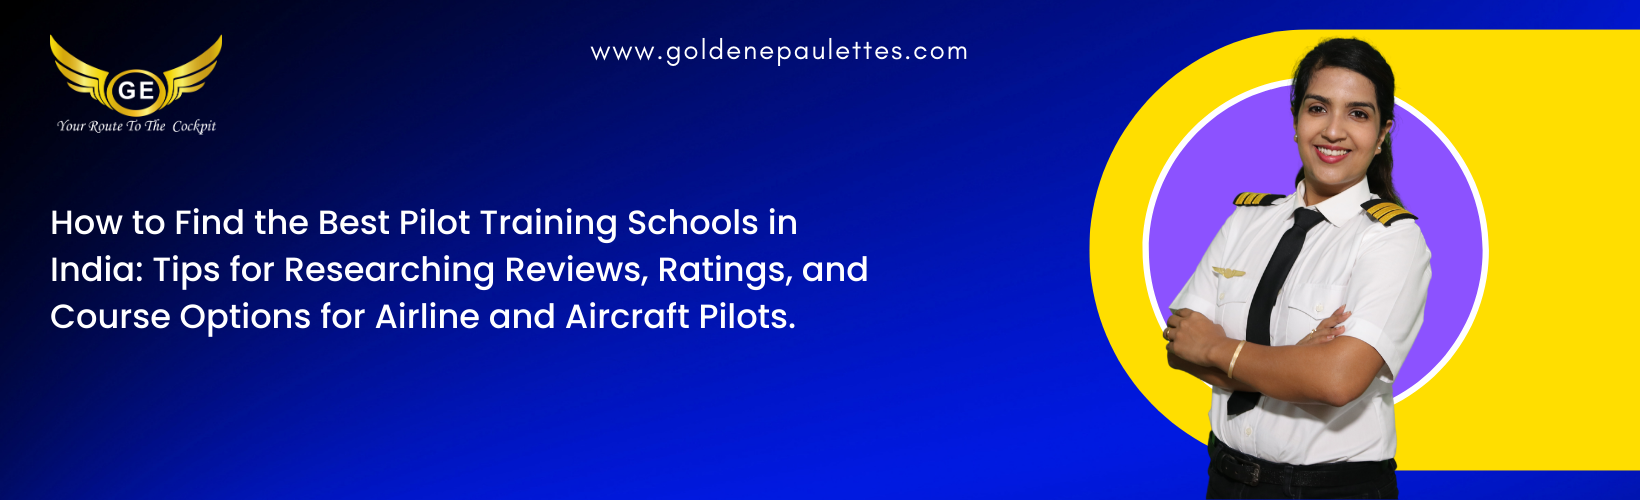 How to Find the Best Pilot Training Schools in India